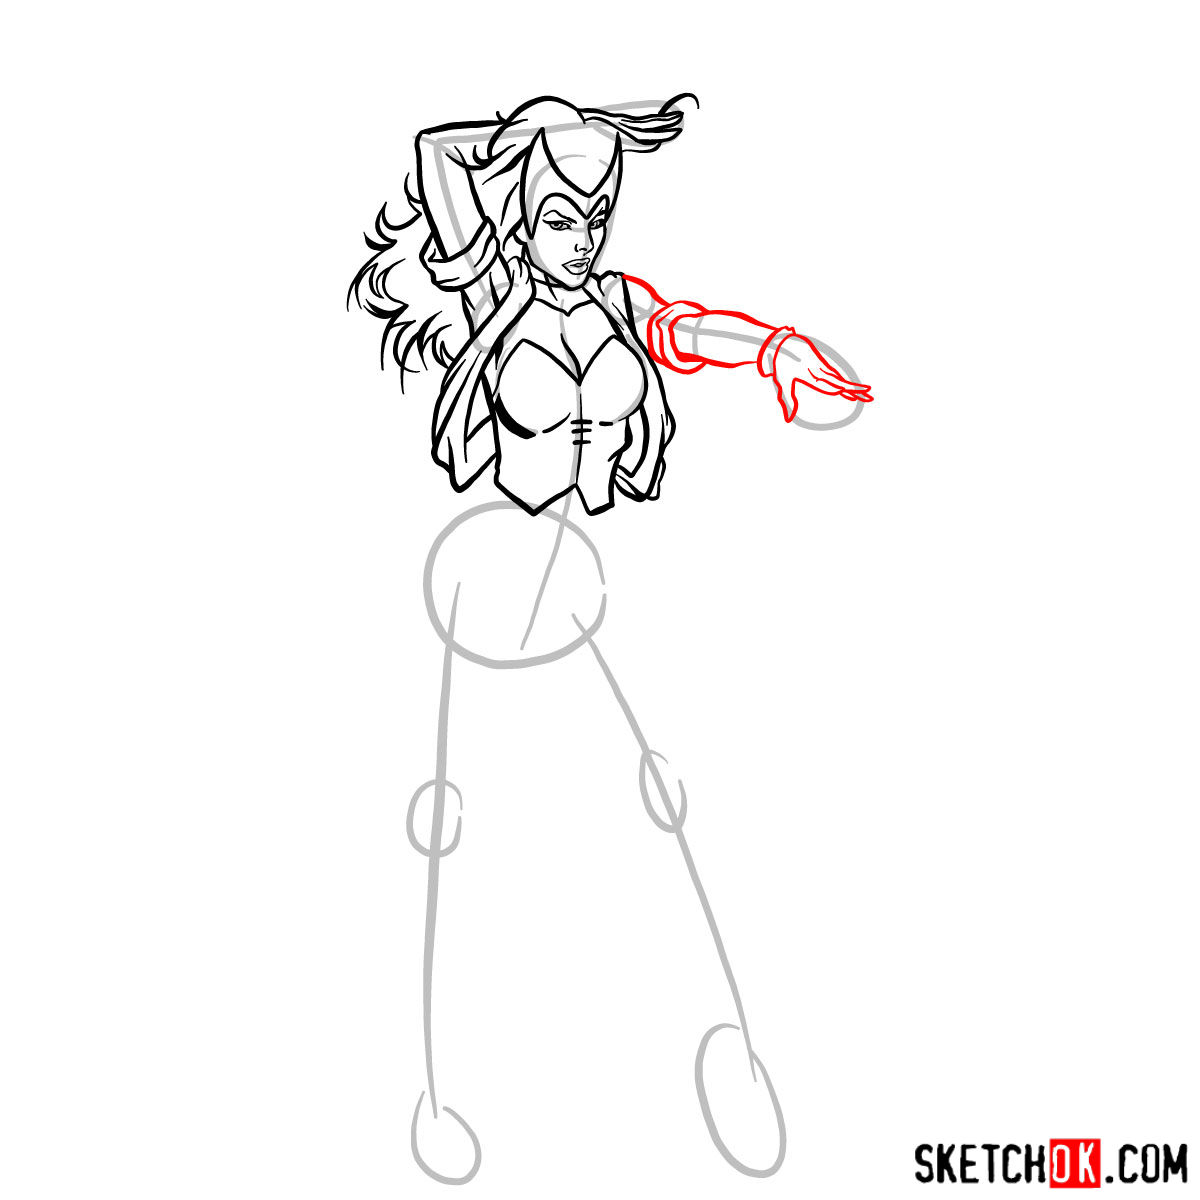 How to draw Scarlet Witch from Marvel Comics - step 09